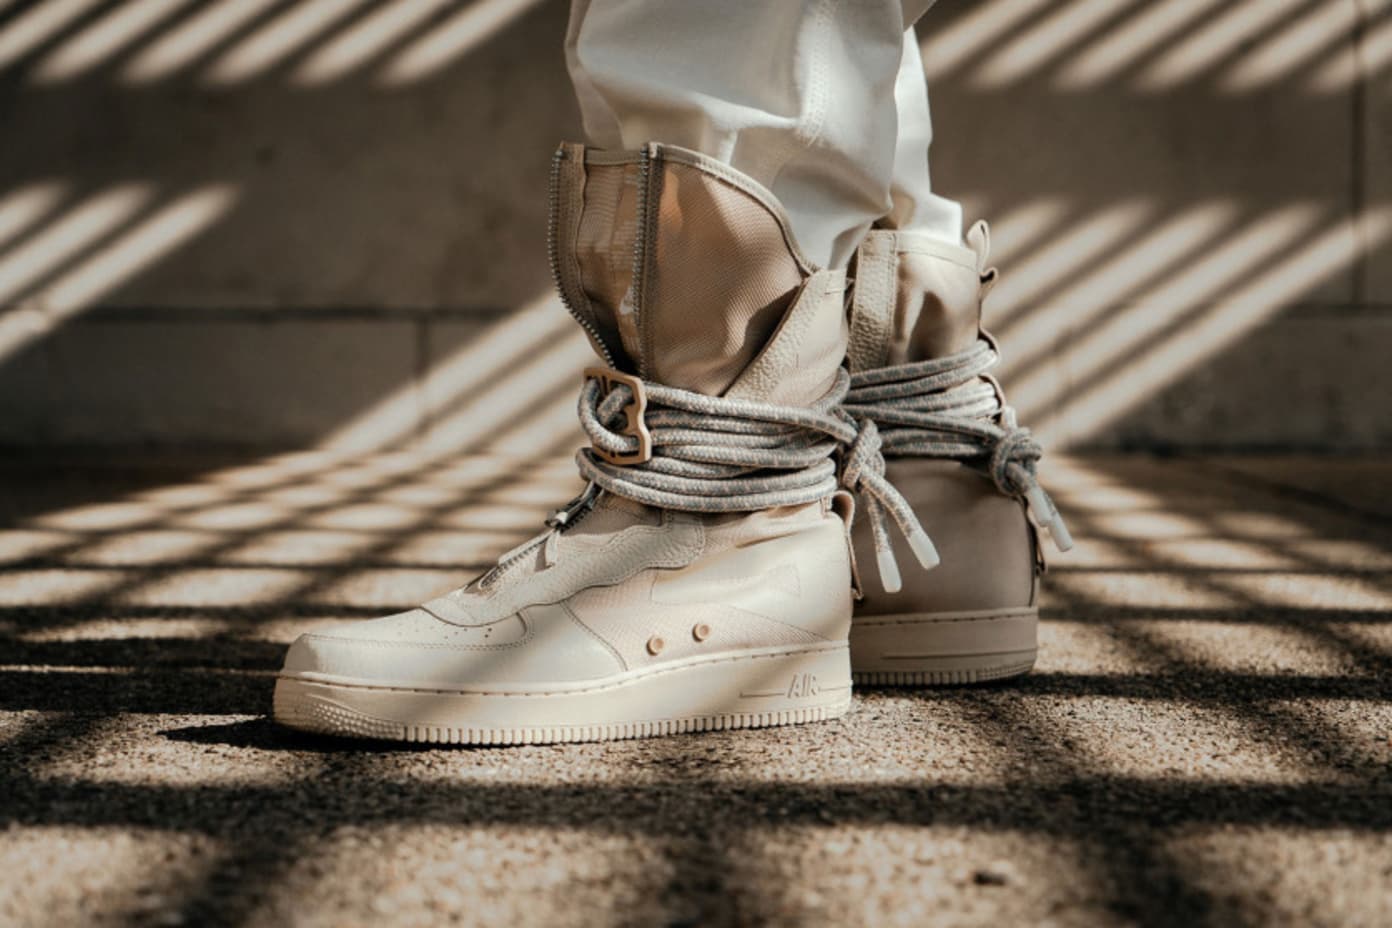 Nike Special Field Air Force 1 High